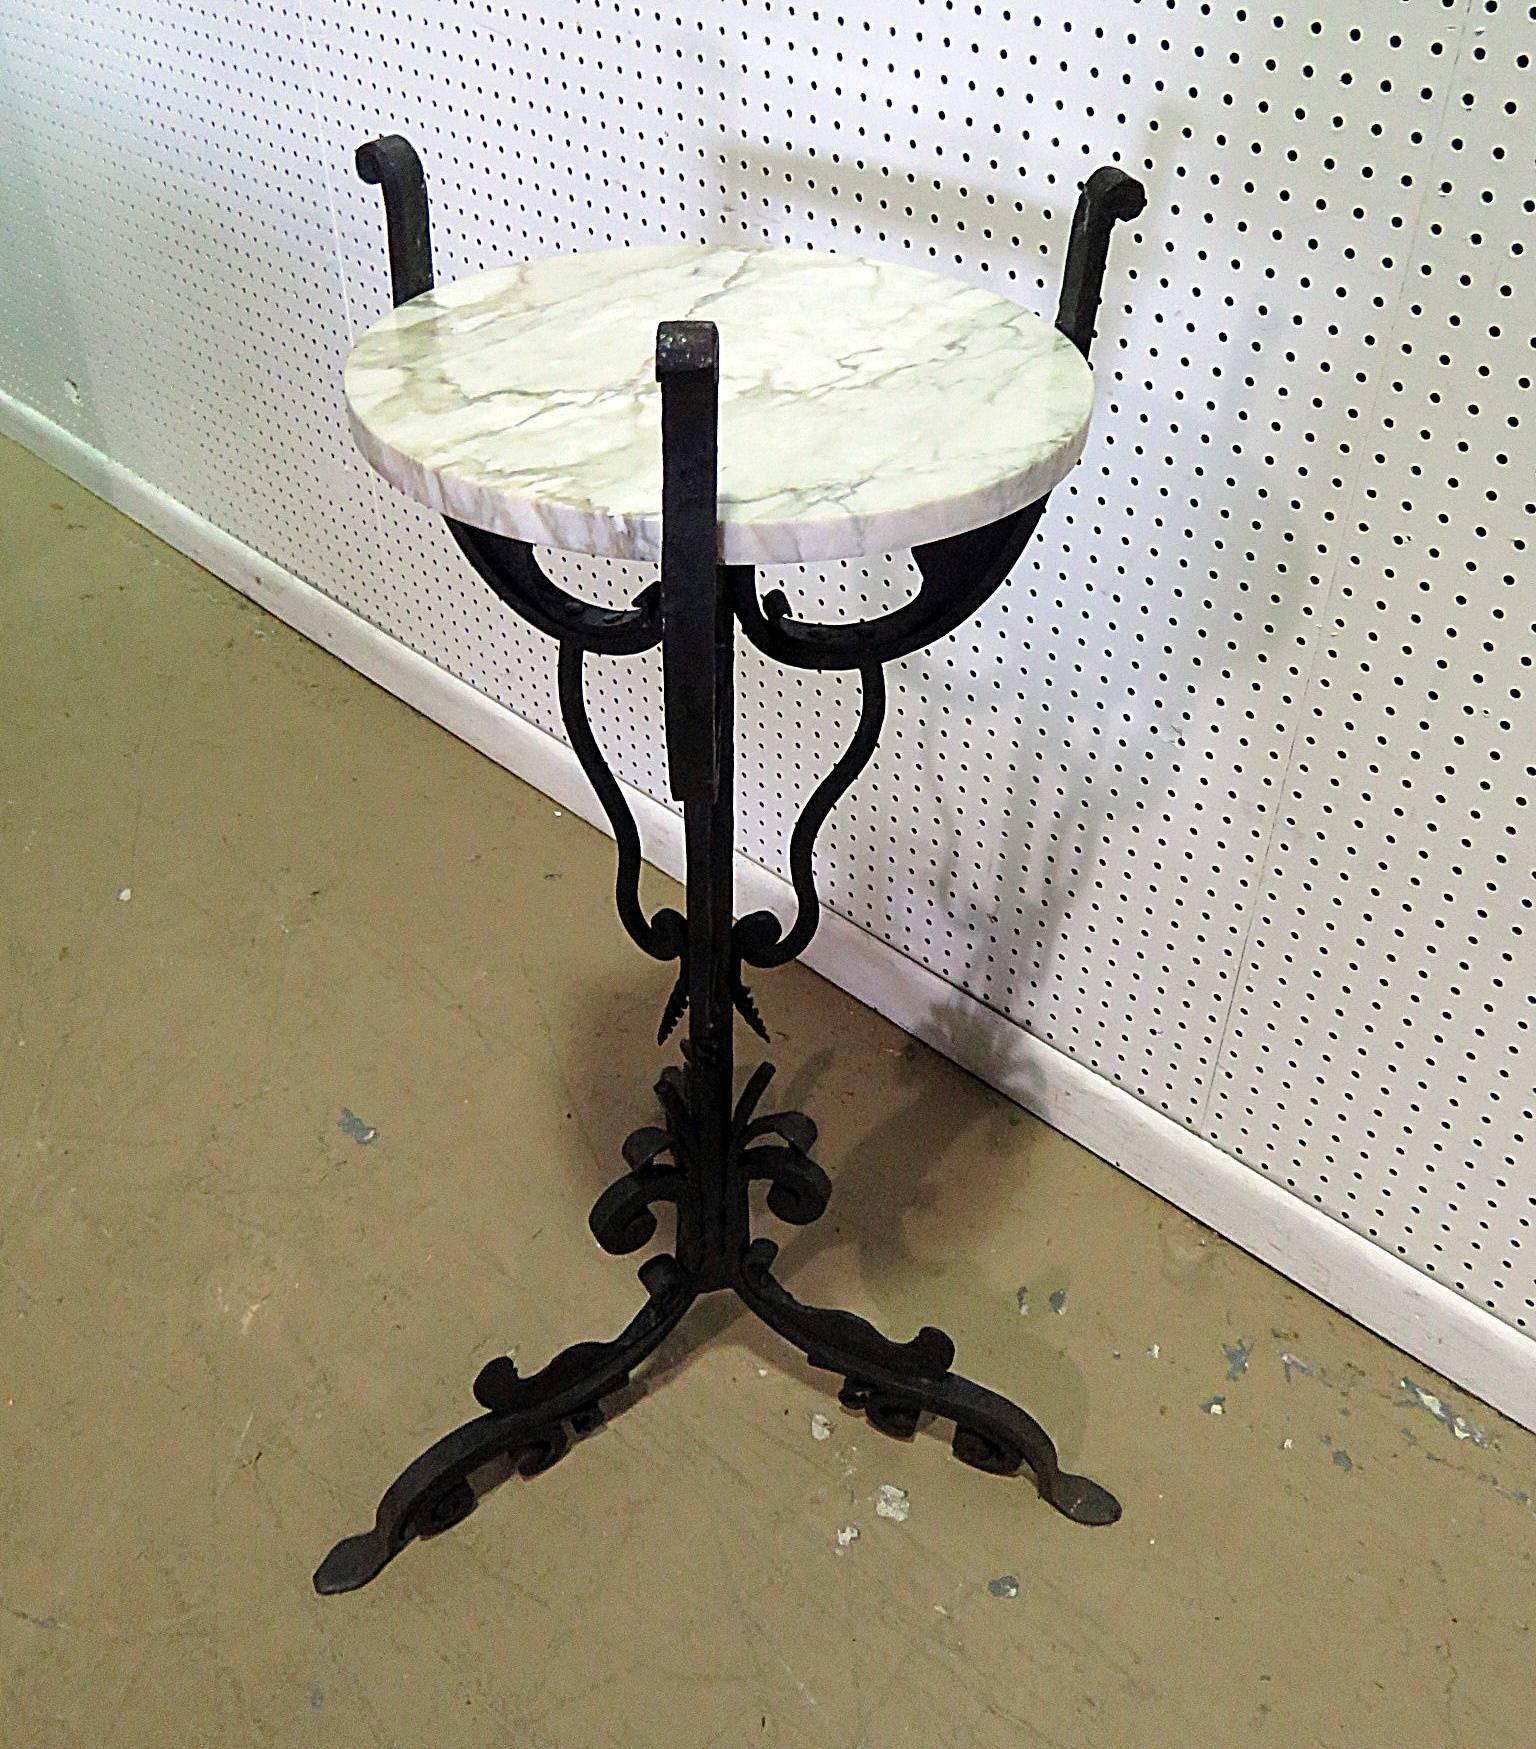 wrought iron plant stands